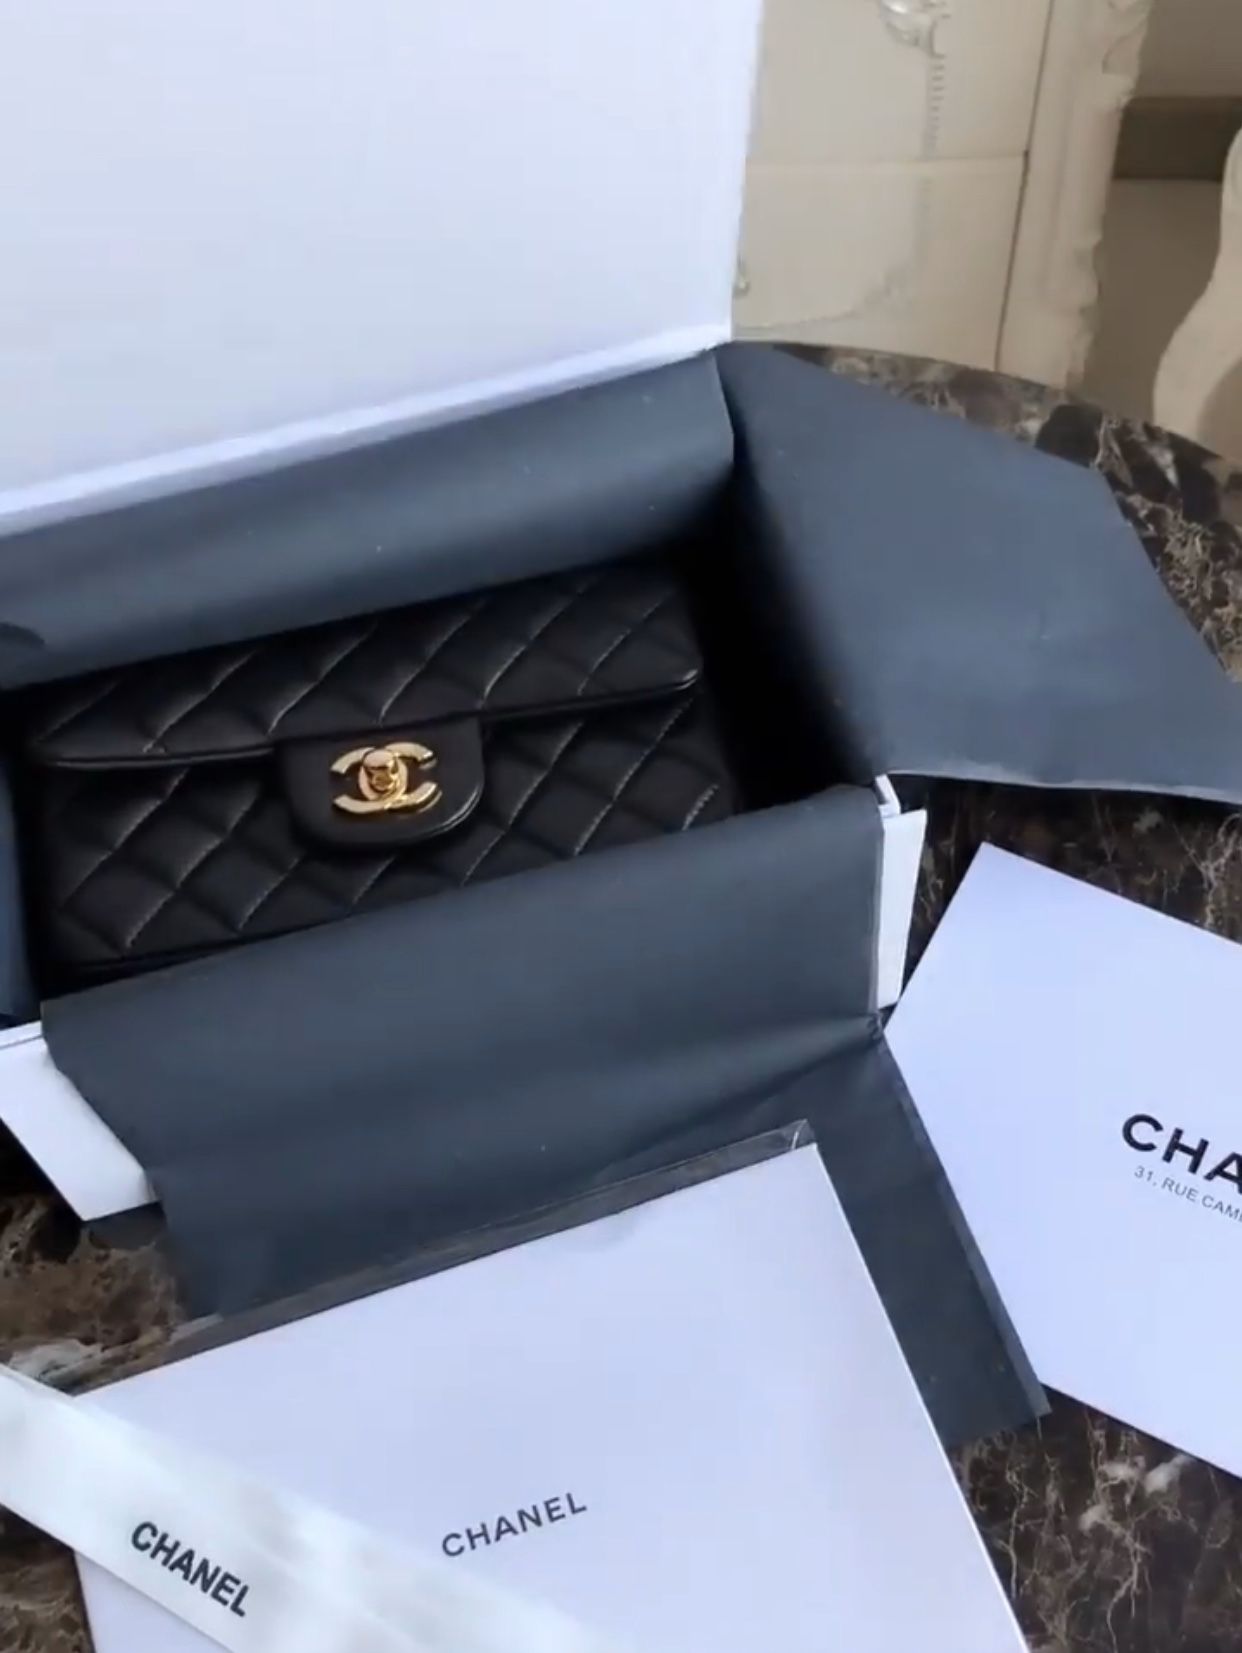 Chanel black crossbody leather bag with golden accents